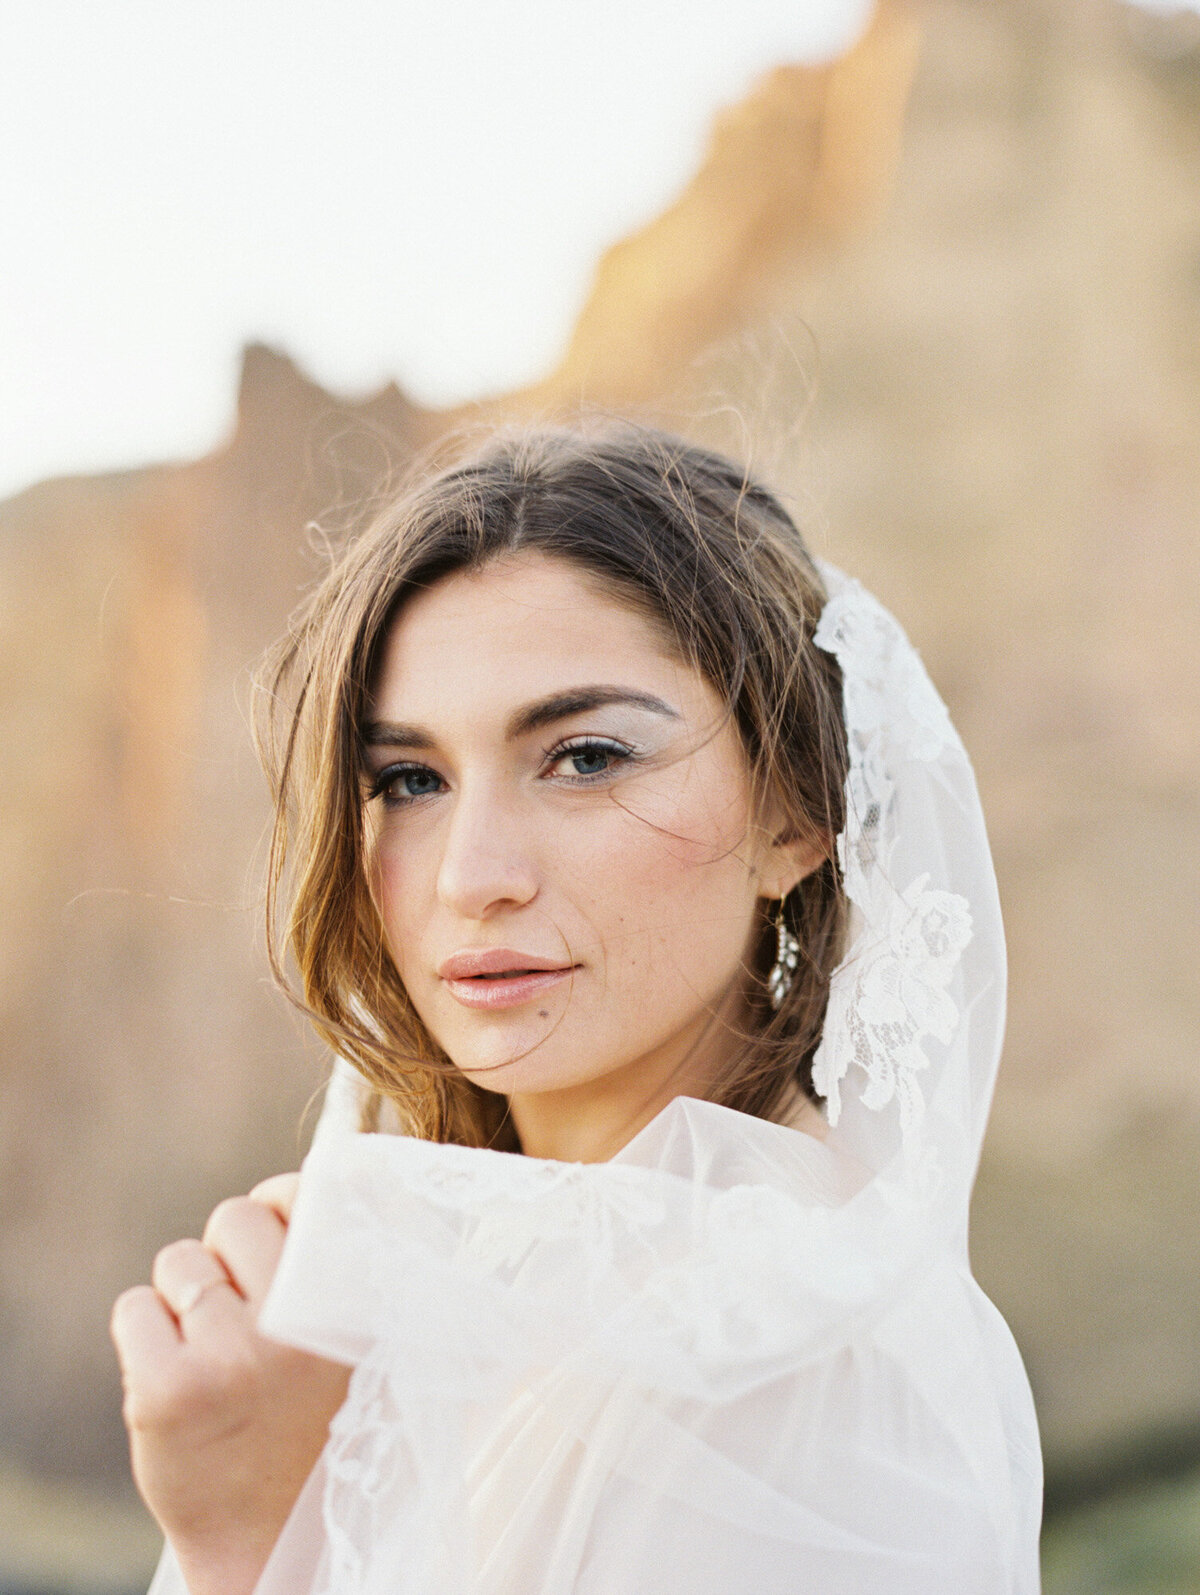 Bride with loose hair wears a wedding veil and looks at the camera.